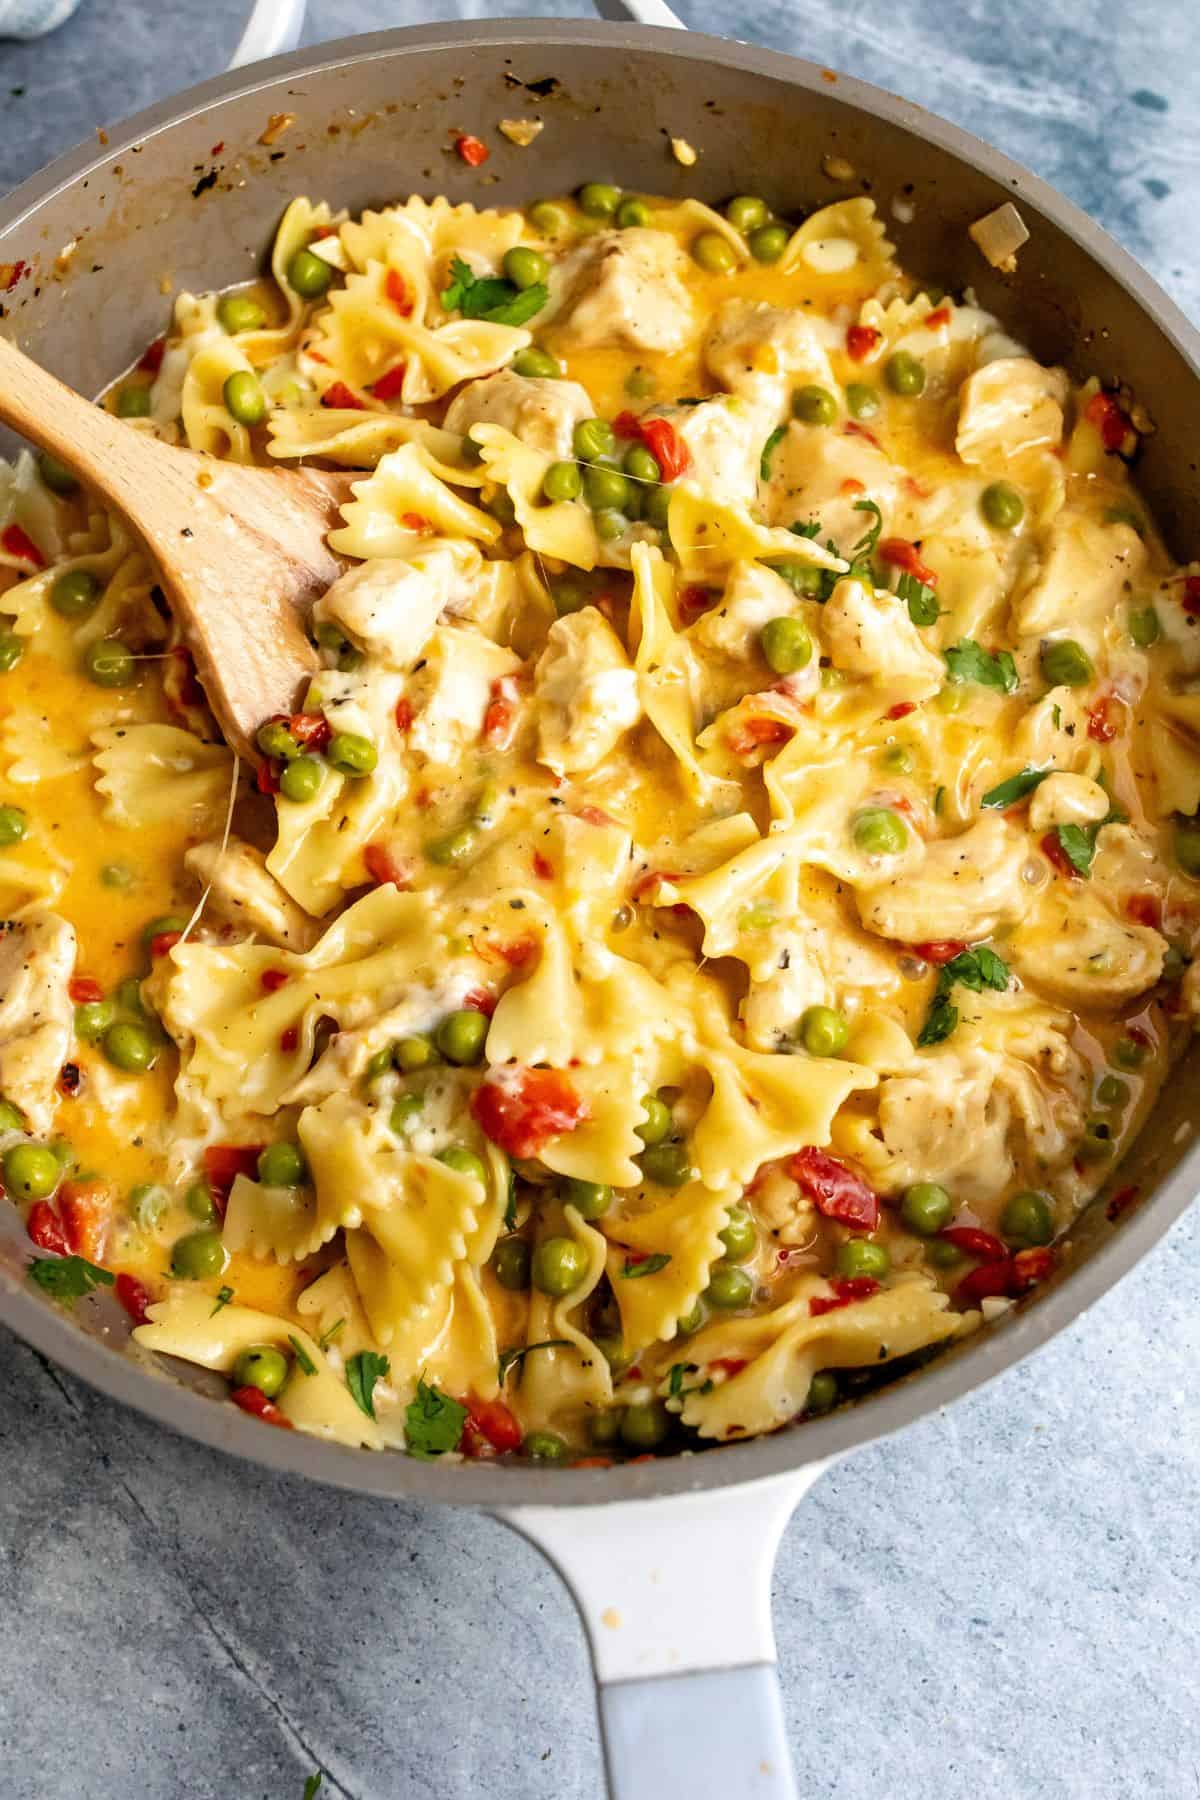 Large grey skillet with cheesy pasta and hunks of chicken in it. 